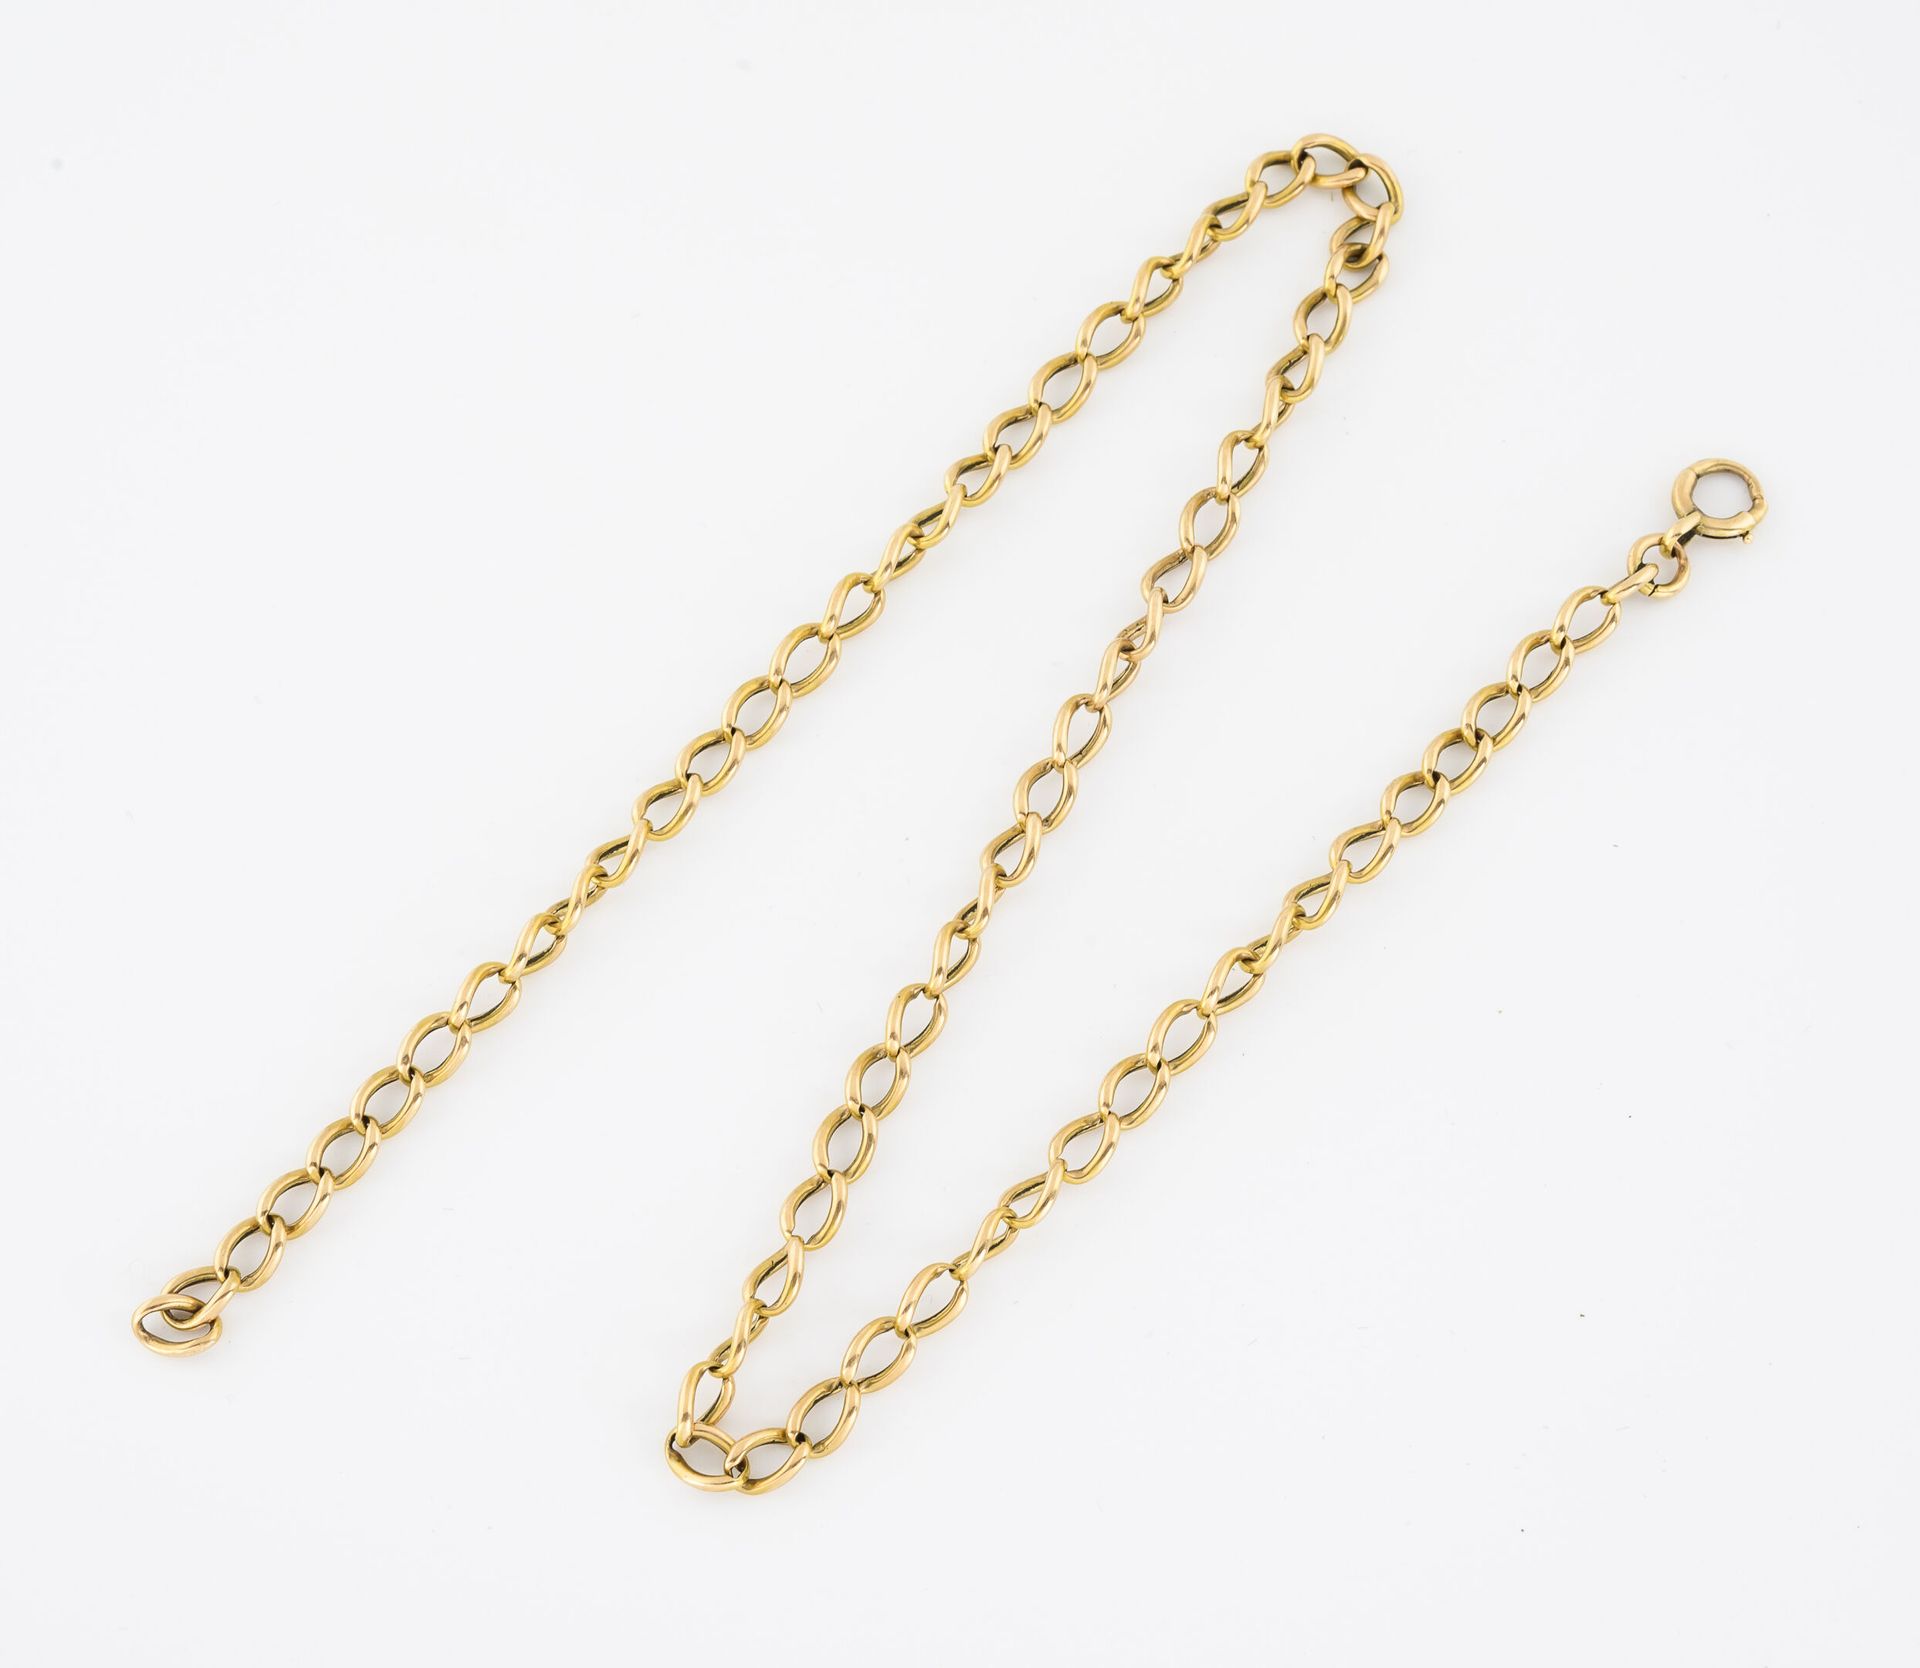 Null Yellow gold necklace (750) with curb chain. 

Spring ring clasp. 

Weight :&hellip;